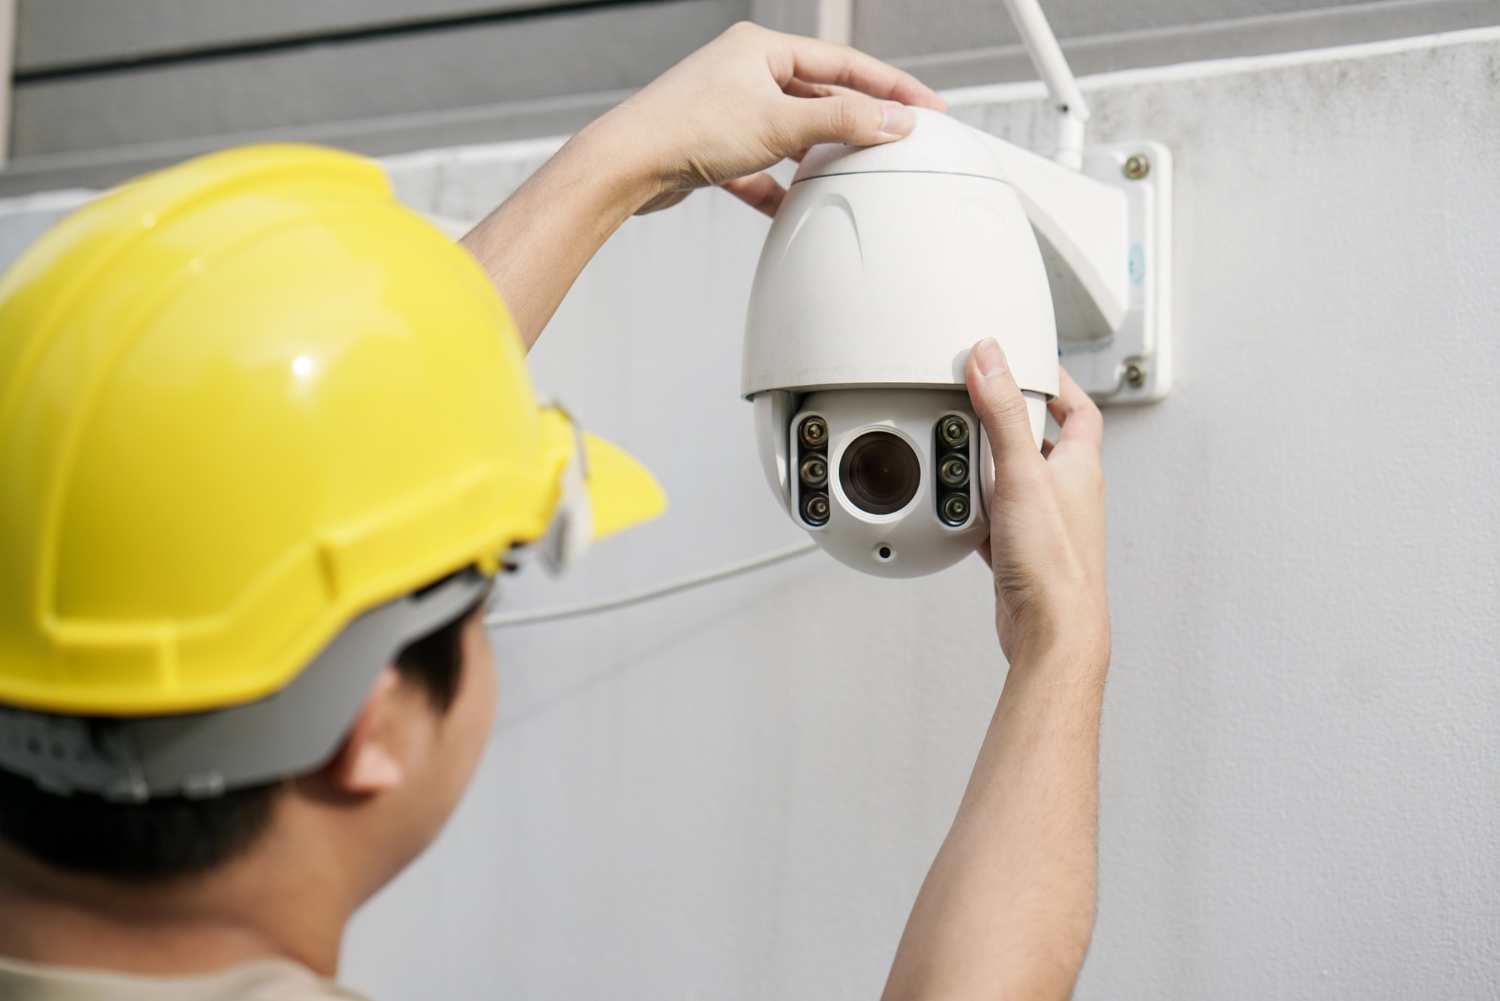 Learn About the Different Types of CCTV Cameras